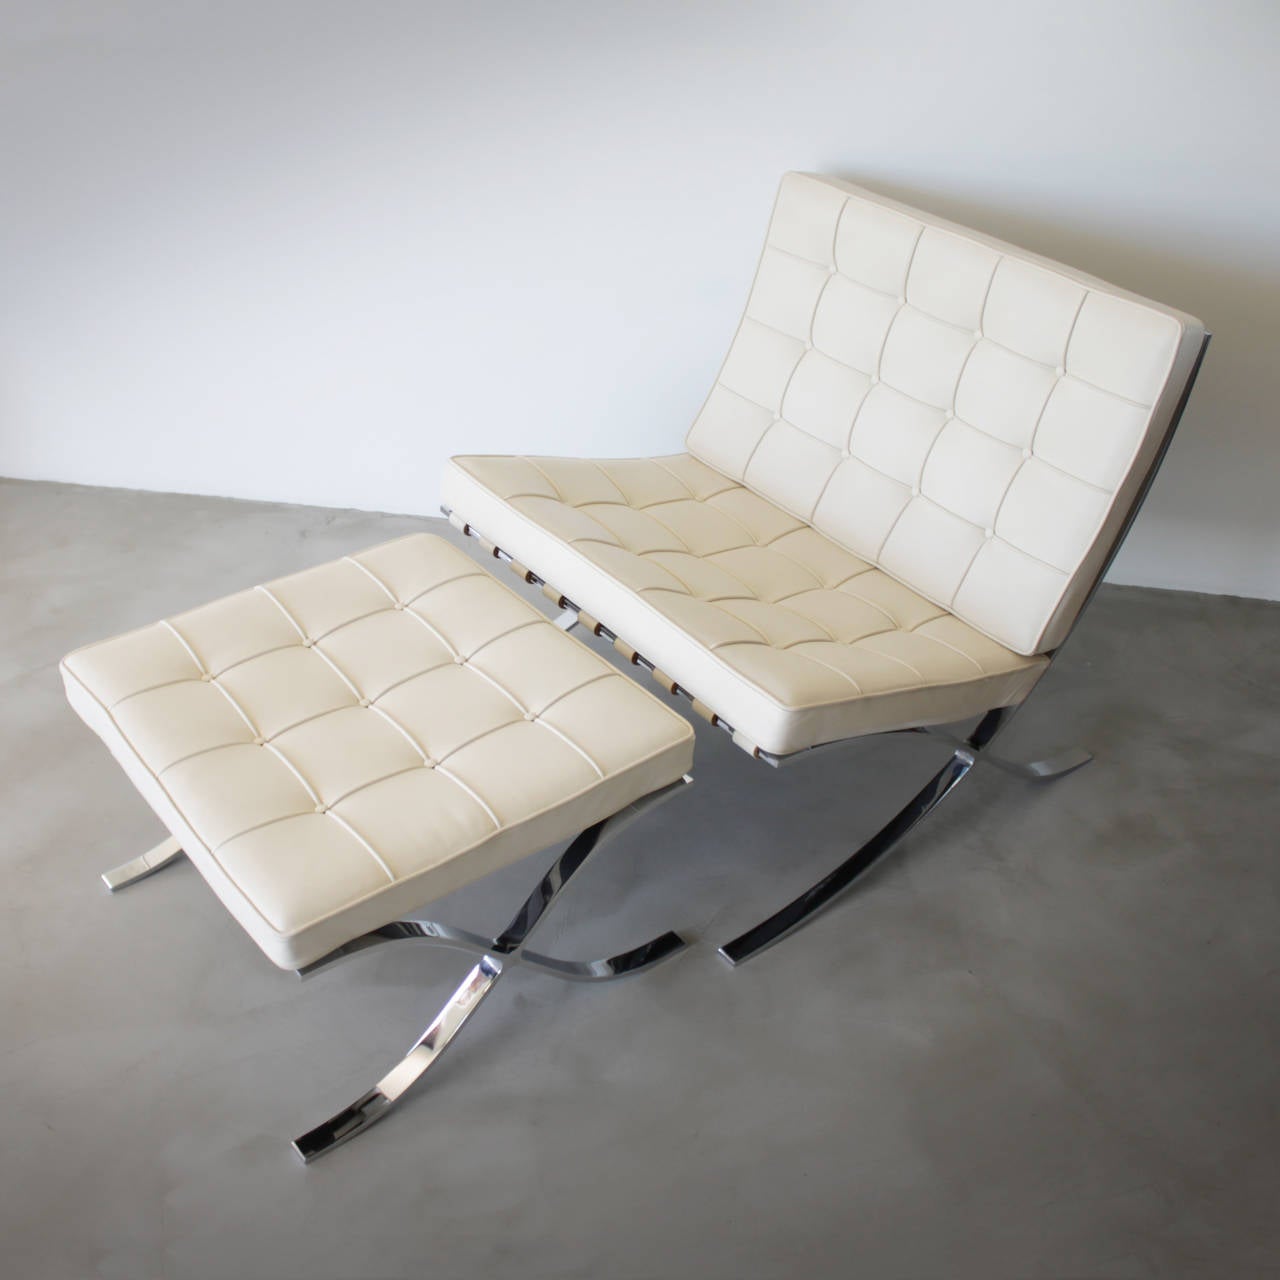 Original off white Barcelona chair with ottoman by Ludwig Mies van der Rohe for Knoll International. The No. MR90 designed for the German Pavilion at the 1929 World Exhibition Barcelona. Bent chromed flat steel frame with leather straps and buttoned